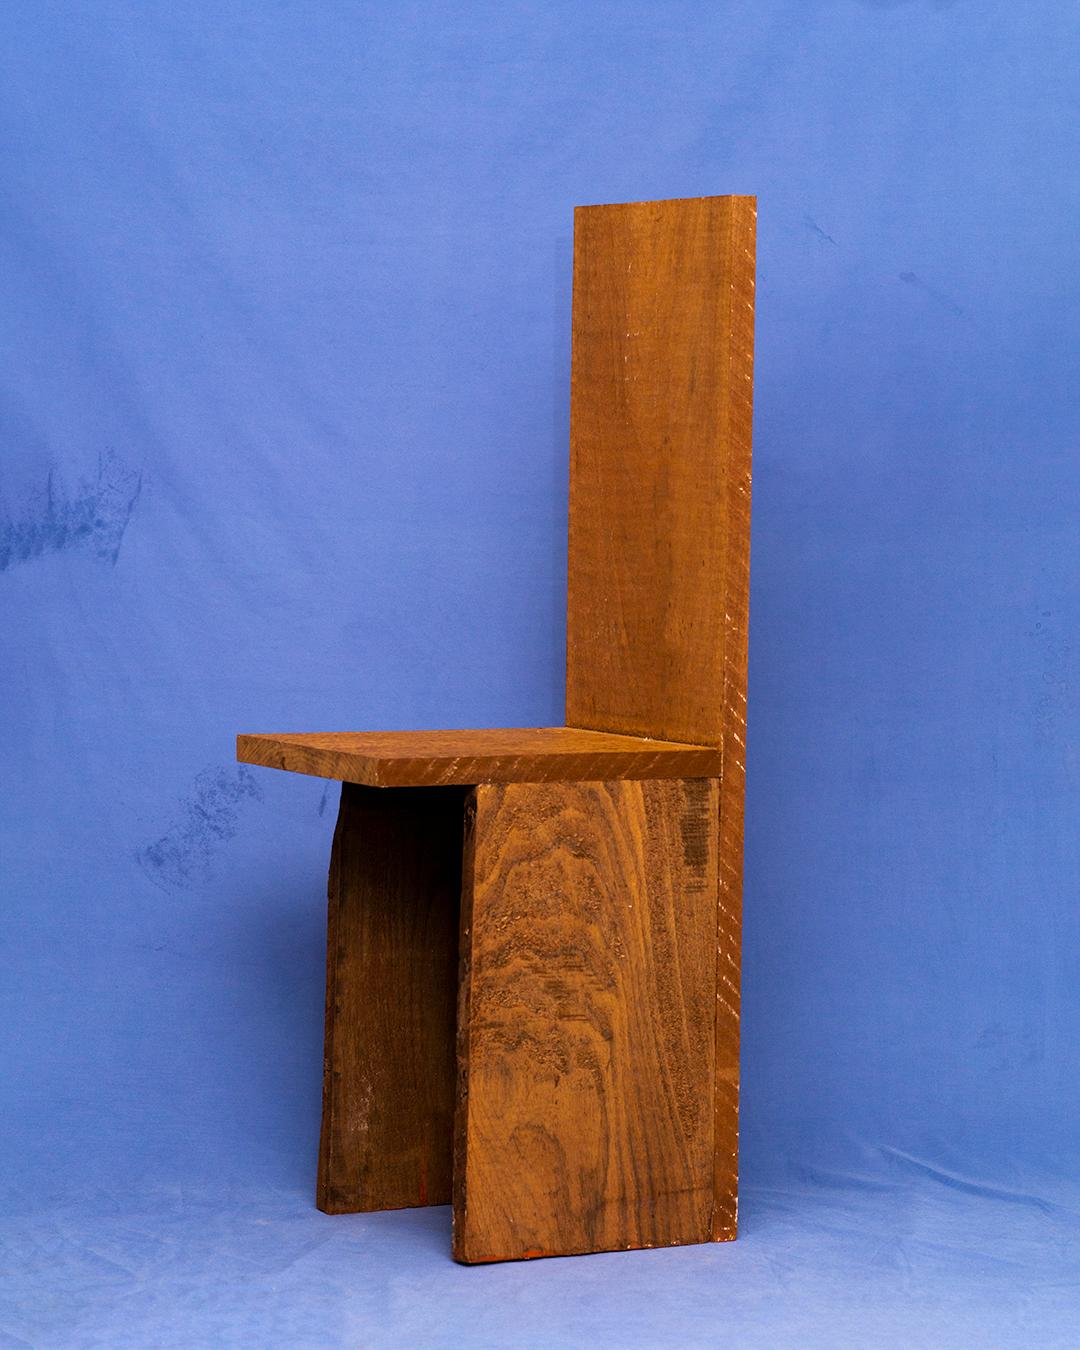 Rare opportunity to own 1 of 1 signed Green River Project LLC Chair. 

This chair was made while Green River Project was in British Columbia, it was from a reclaimed hardwood spot they had found on Vancouver Island. It's sort of a meditation on a